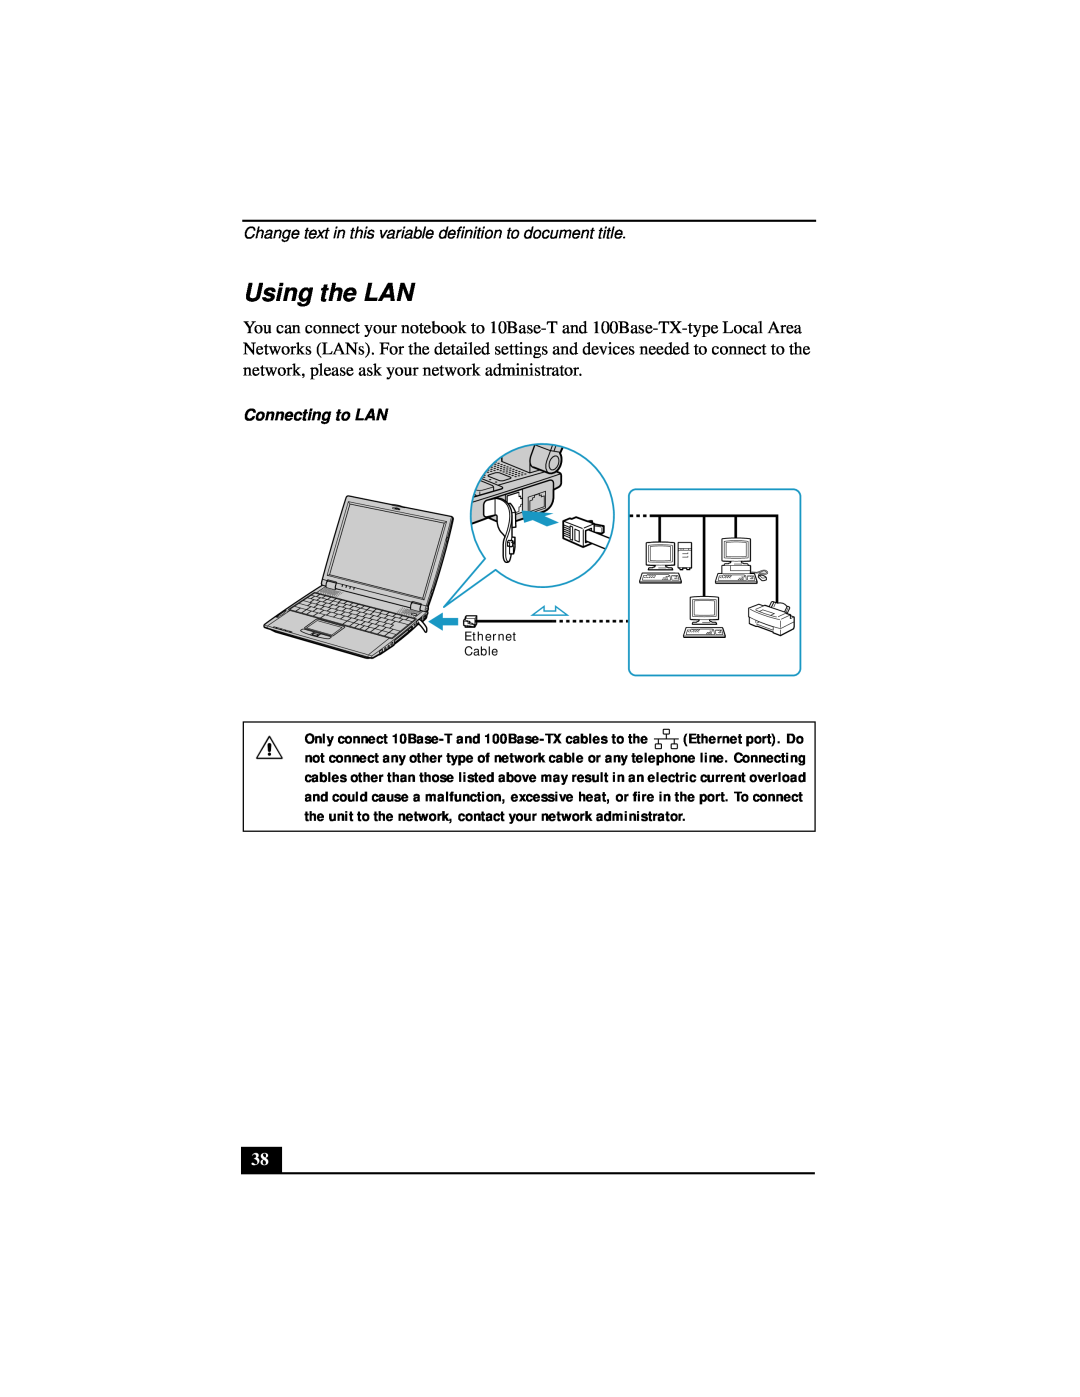 Sony Notebook Computer manual Using the LAN, Change text in this variable definition to document title, Connecting to LAN 